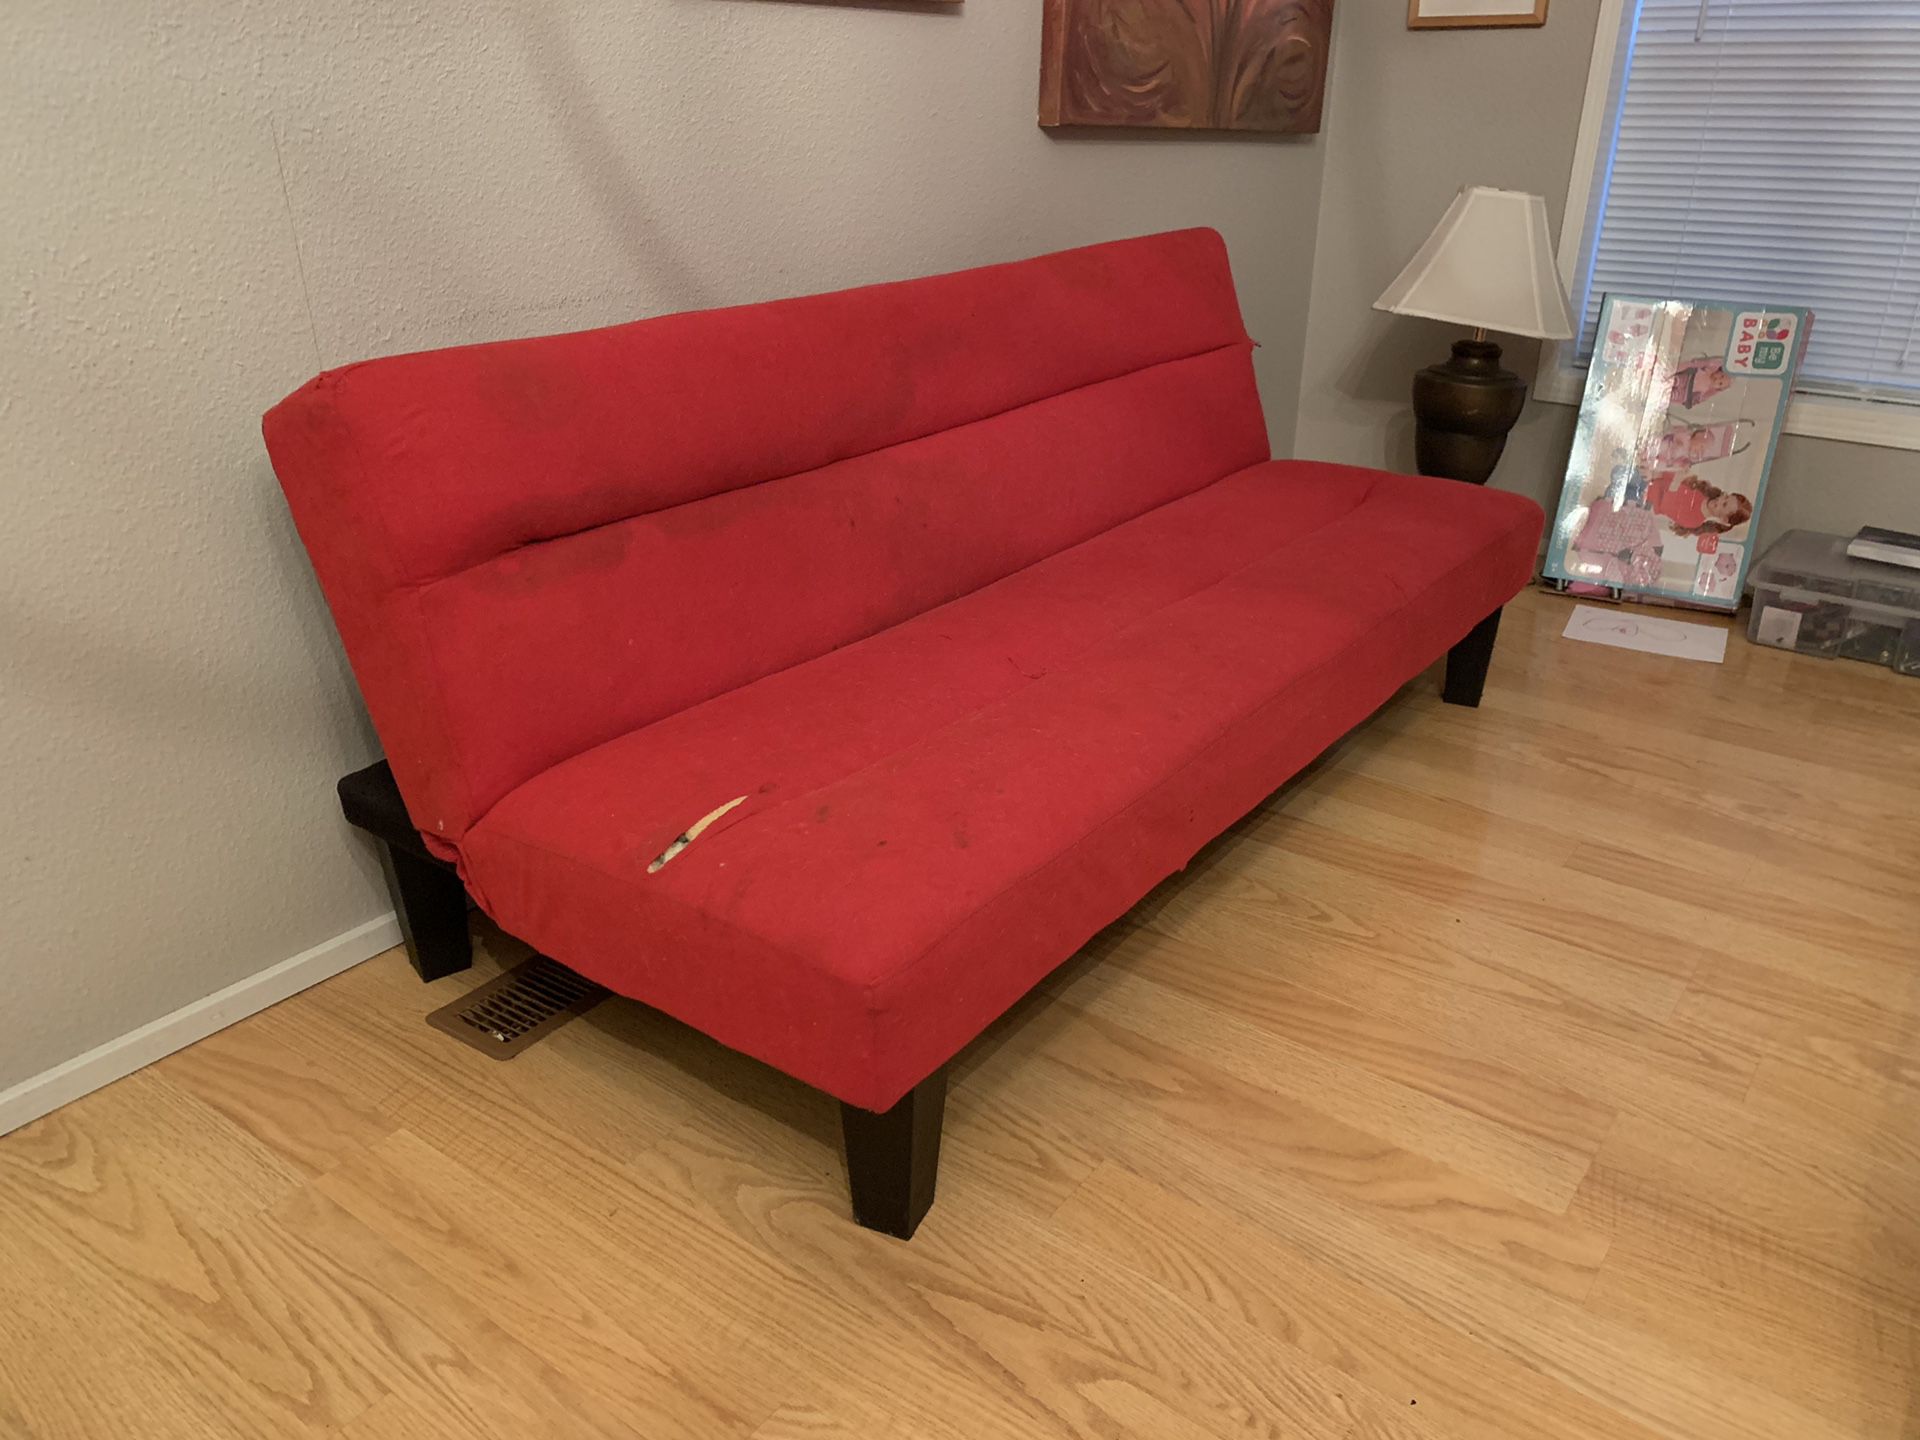 Red small kids futon couch has a couple rips in it